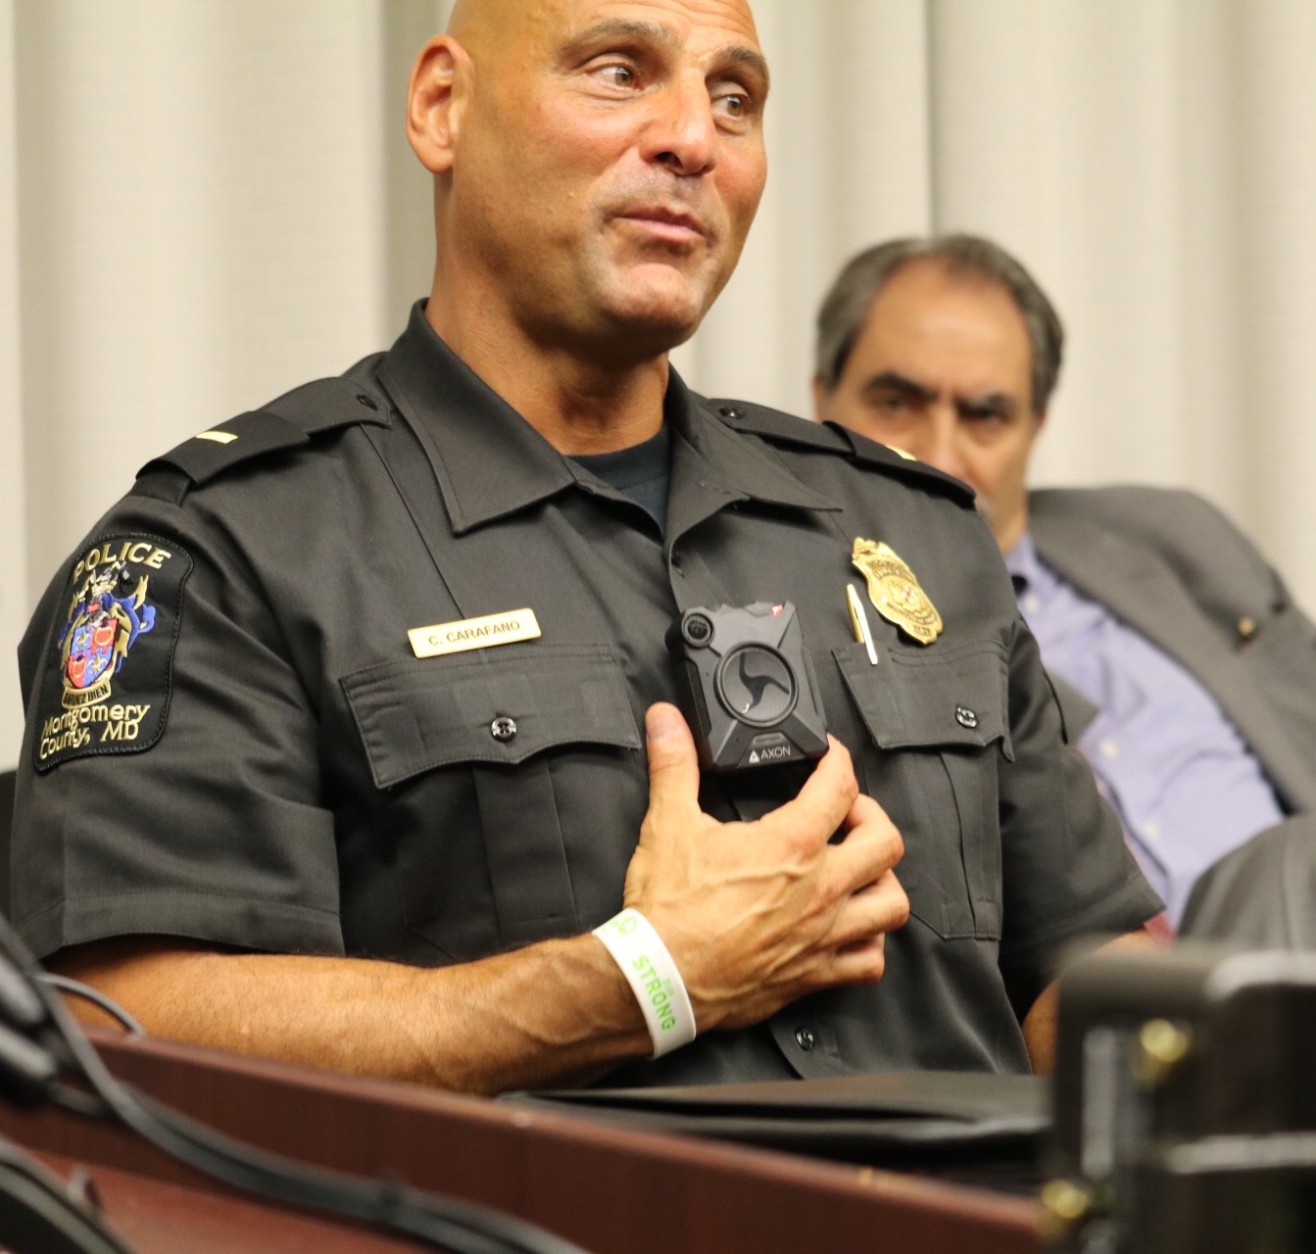 Lt. Chuck Carafano discusses the advantages of the police body-worn cameras. (WTOP/Kate Ryan)